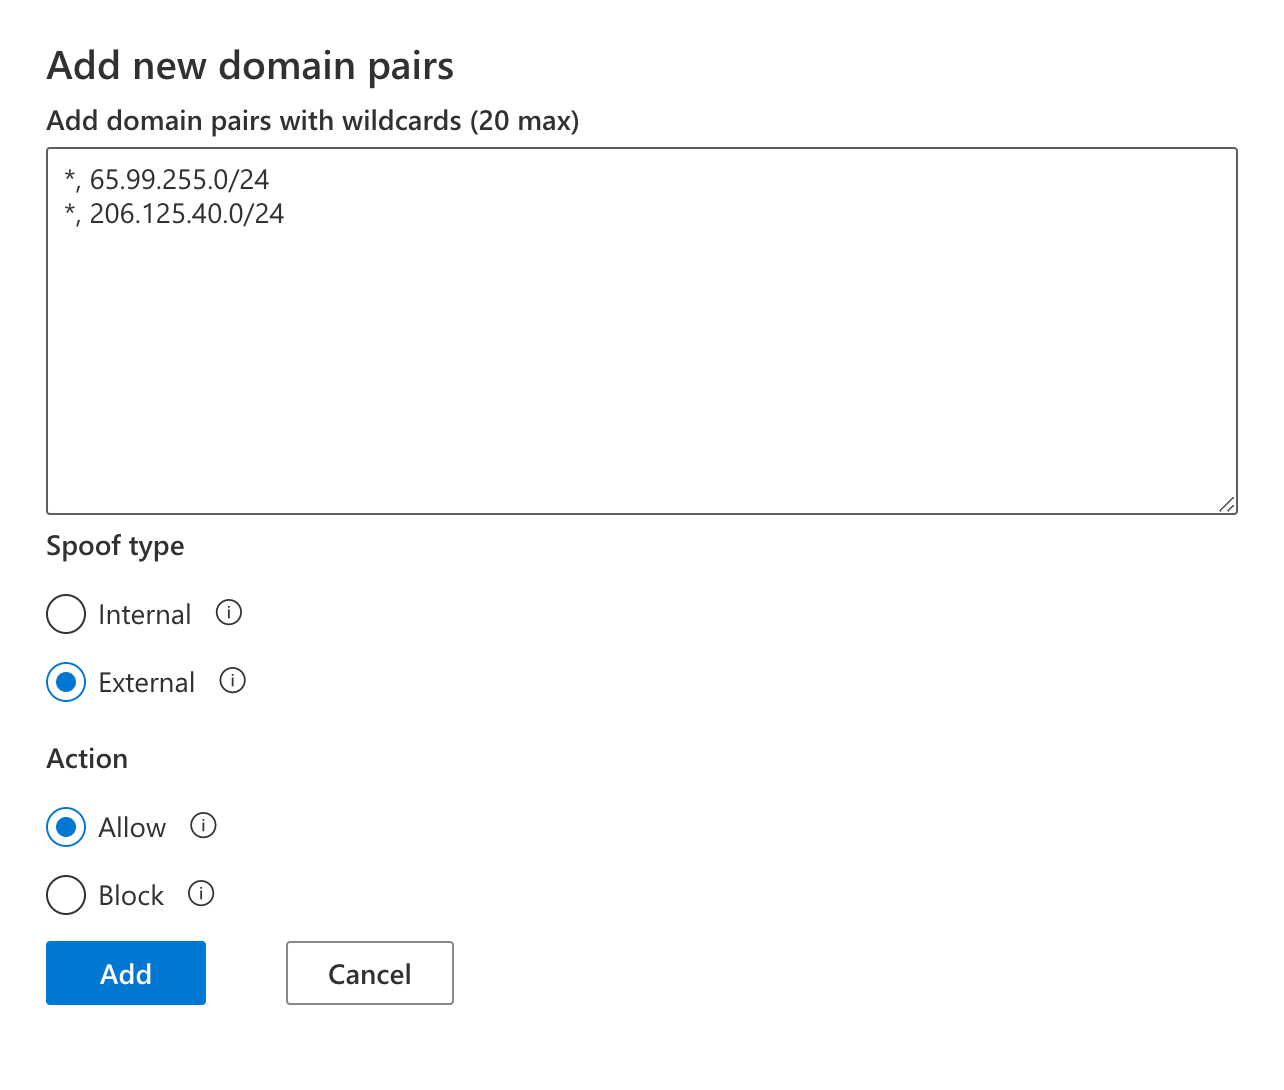 
Configuring Microsoft365 with ExchangeDefender